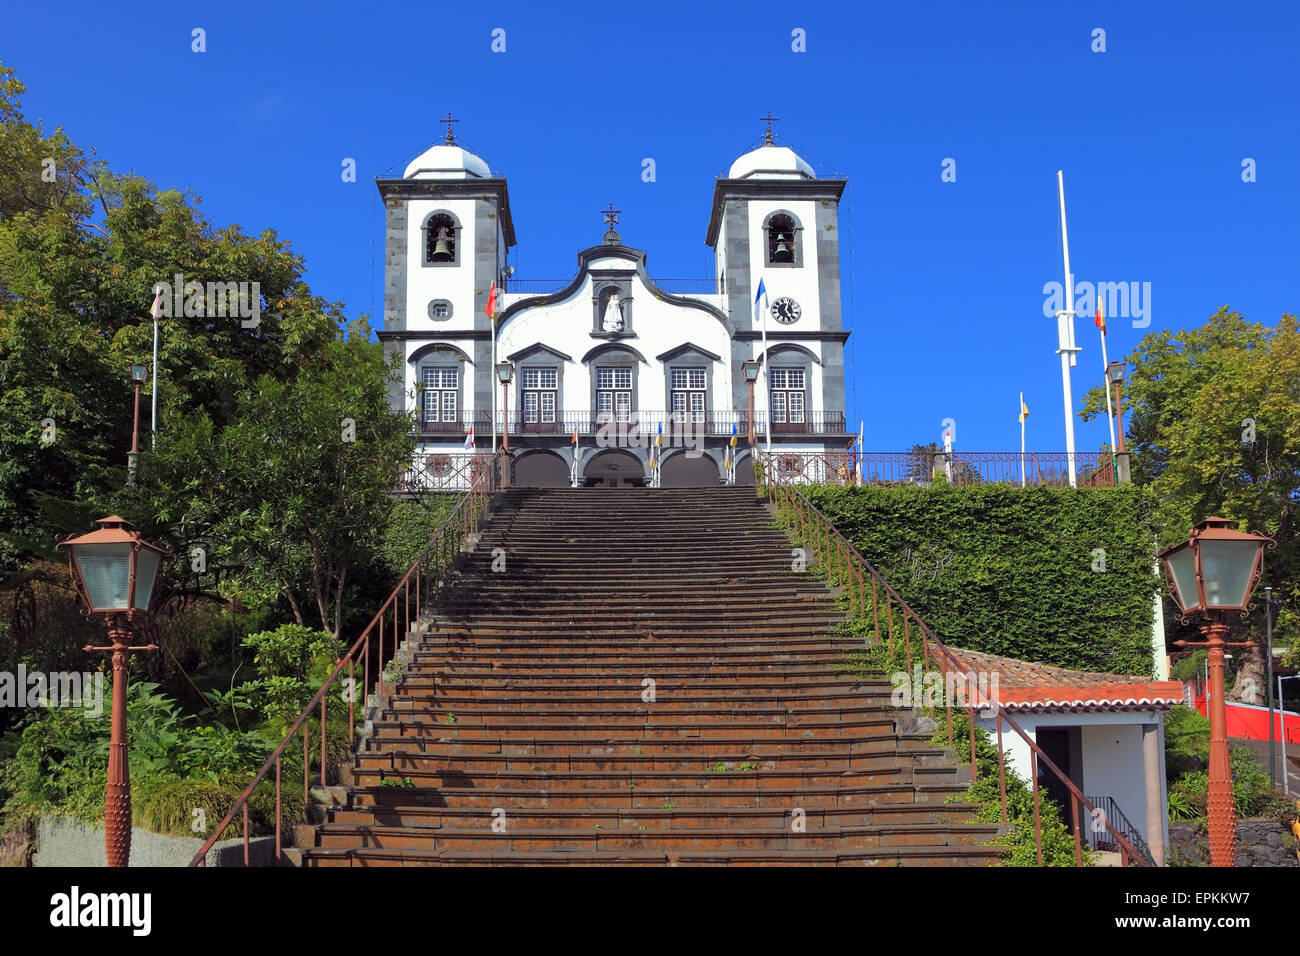 Sights of the Portuguese island Stock Photo